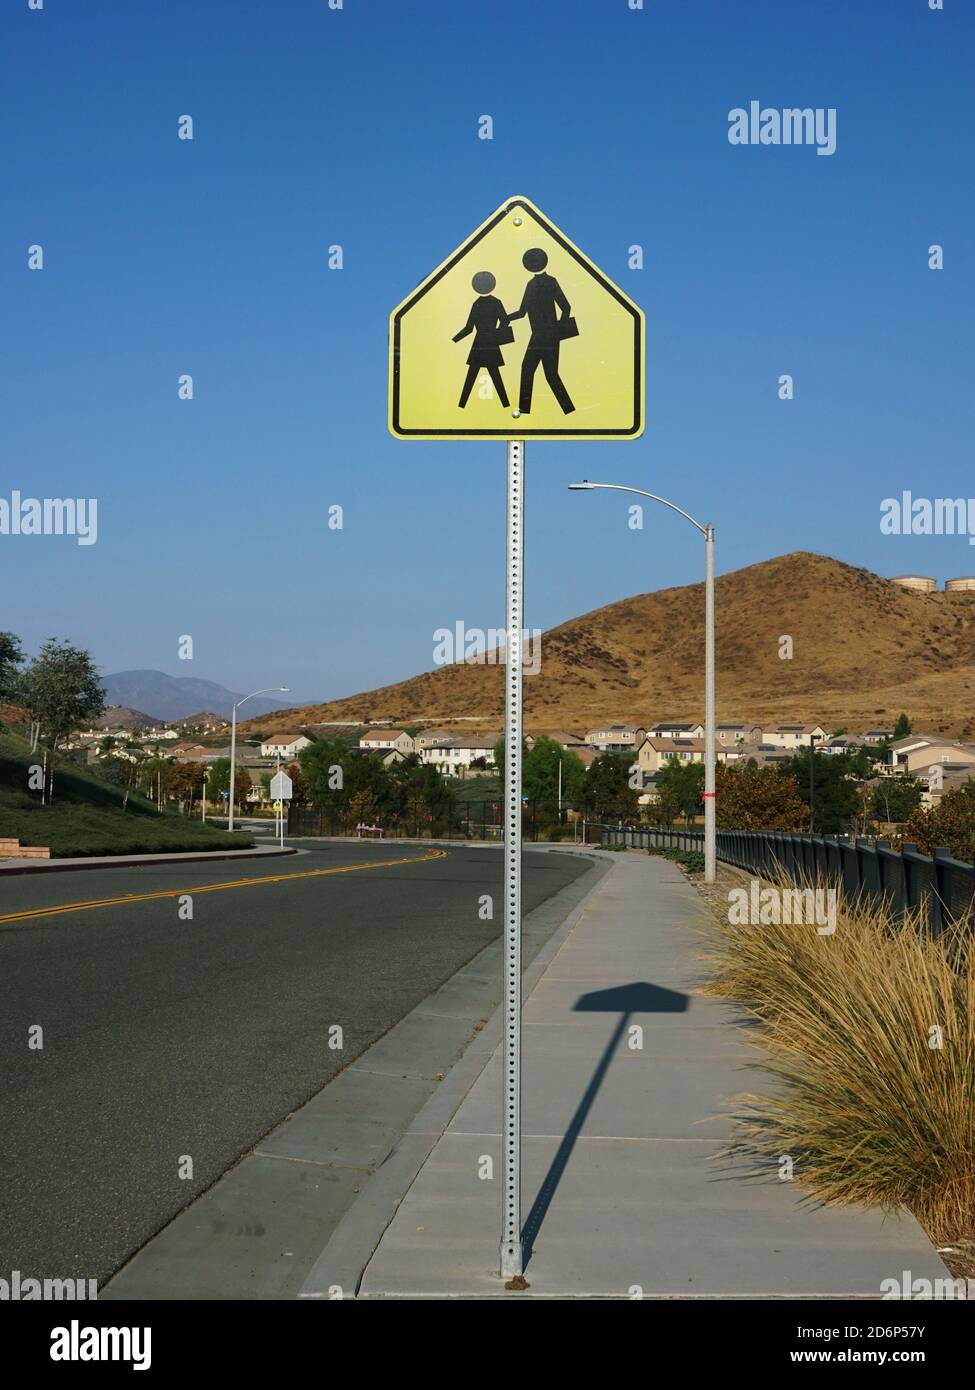 Wide angle view of school crossing sign Stock Photo